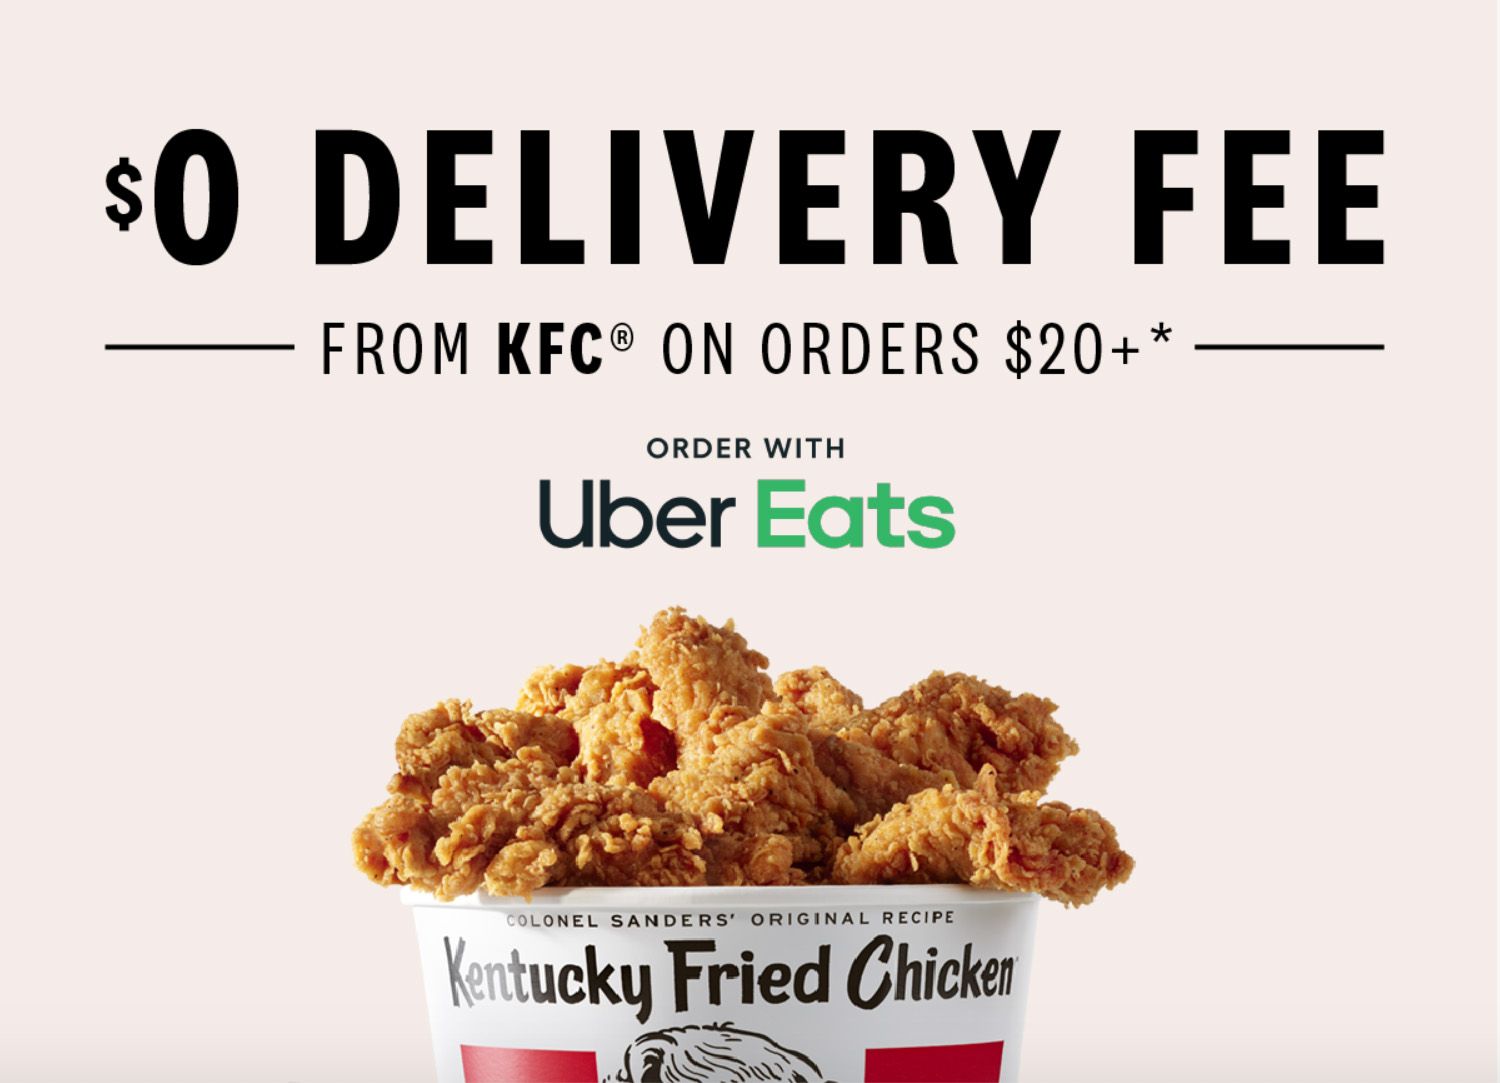 This Weekend Only Get a $0 Delivery Fee When You Order $20+ from Kentucky Fried Chicken Through Uber Eats